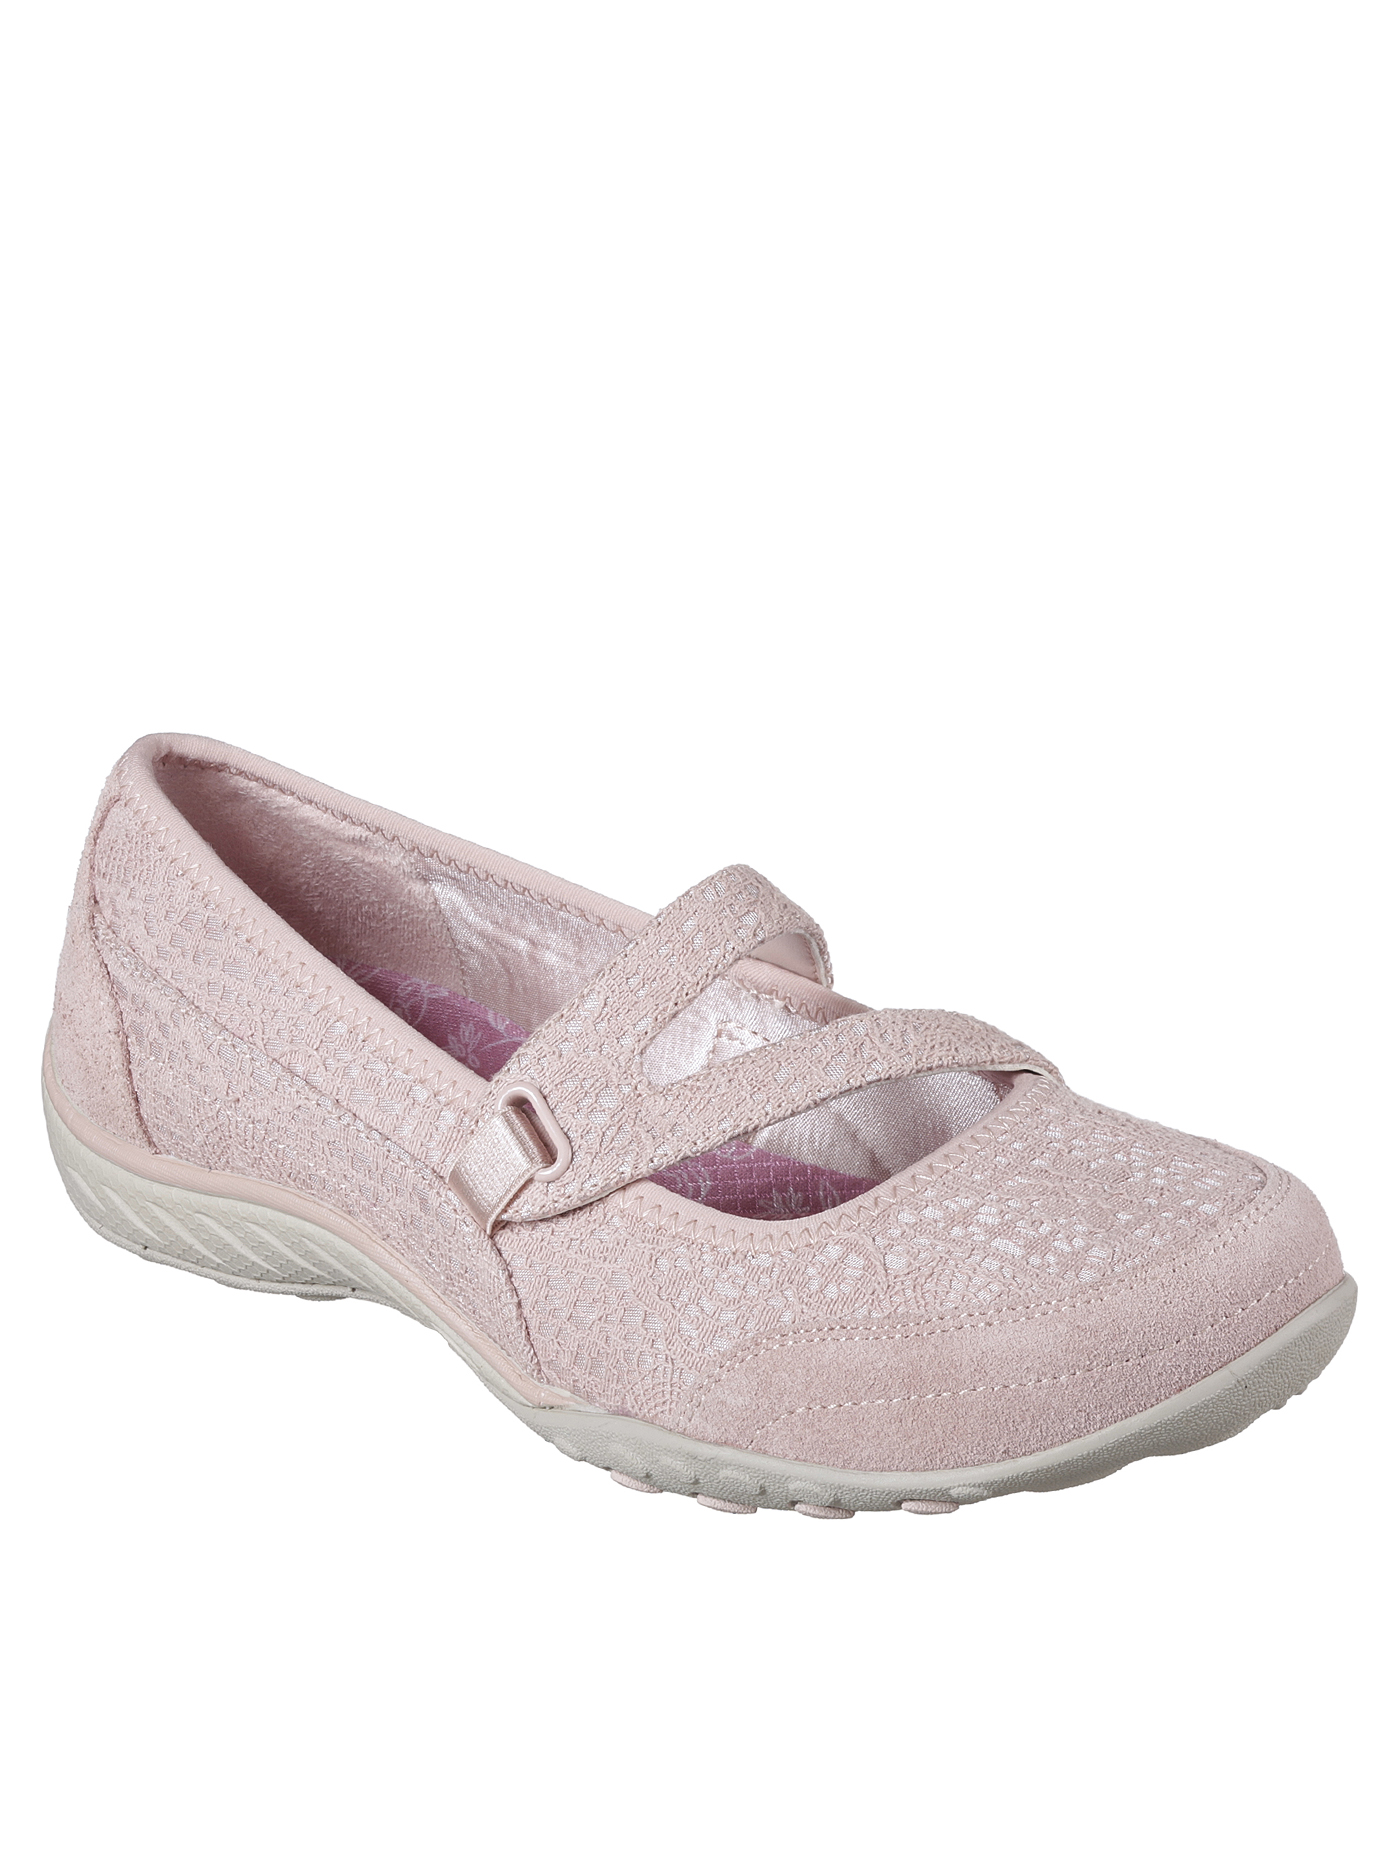 SKECHERS Women's Casual Shoes Relaxed 